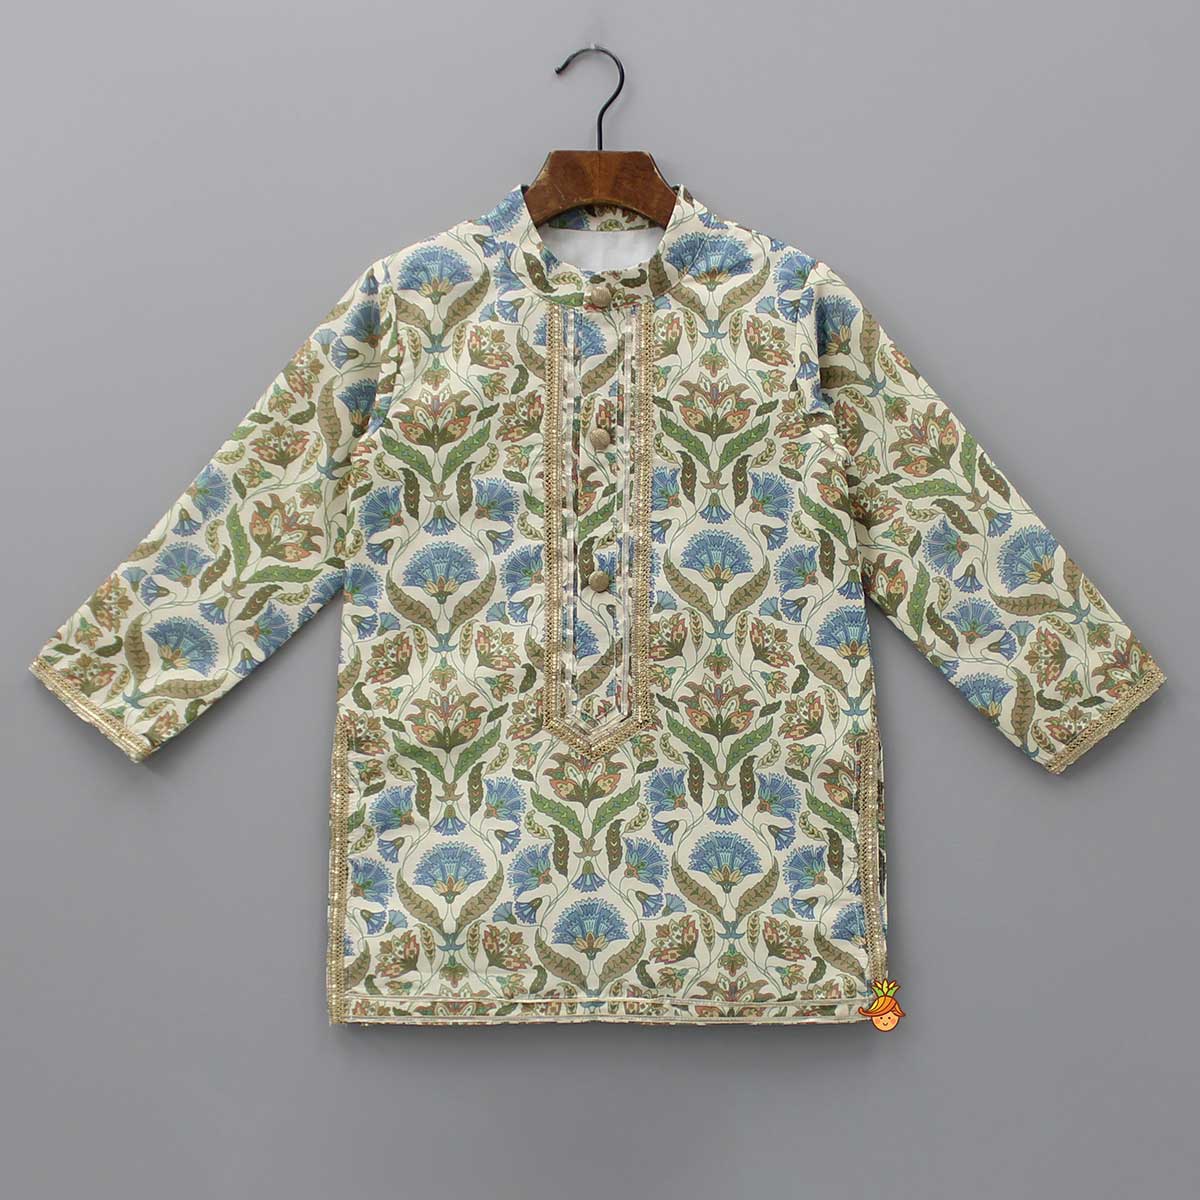 Pre Order: Floral Embroidered Multicolour Kurta With Matching Pyjama